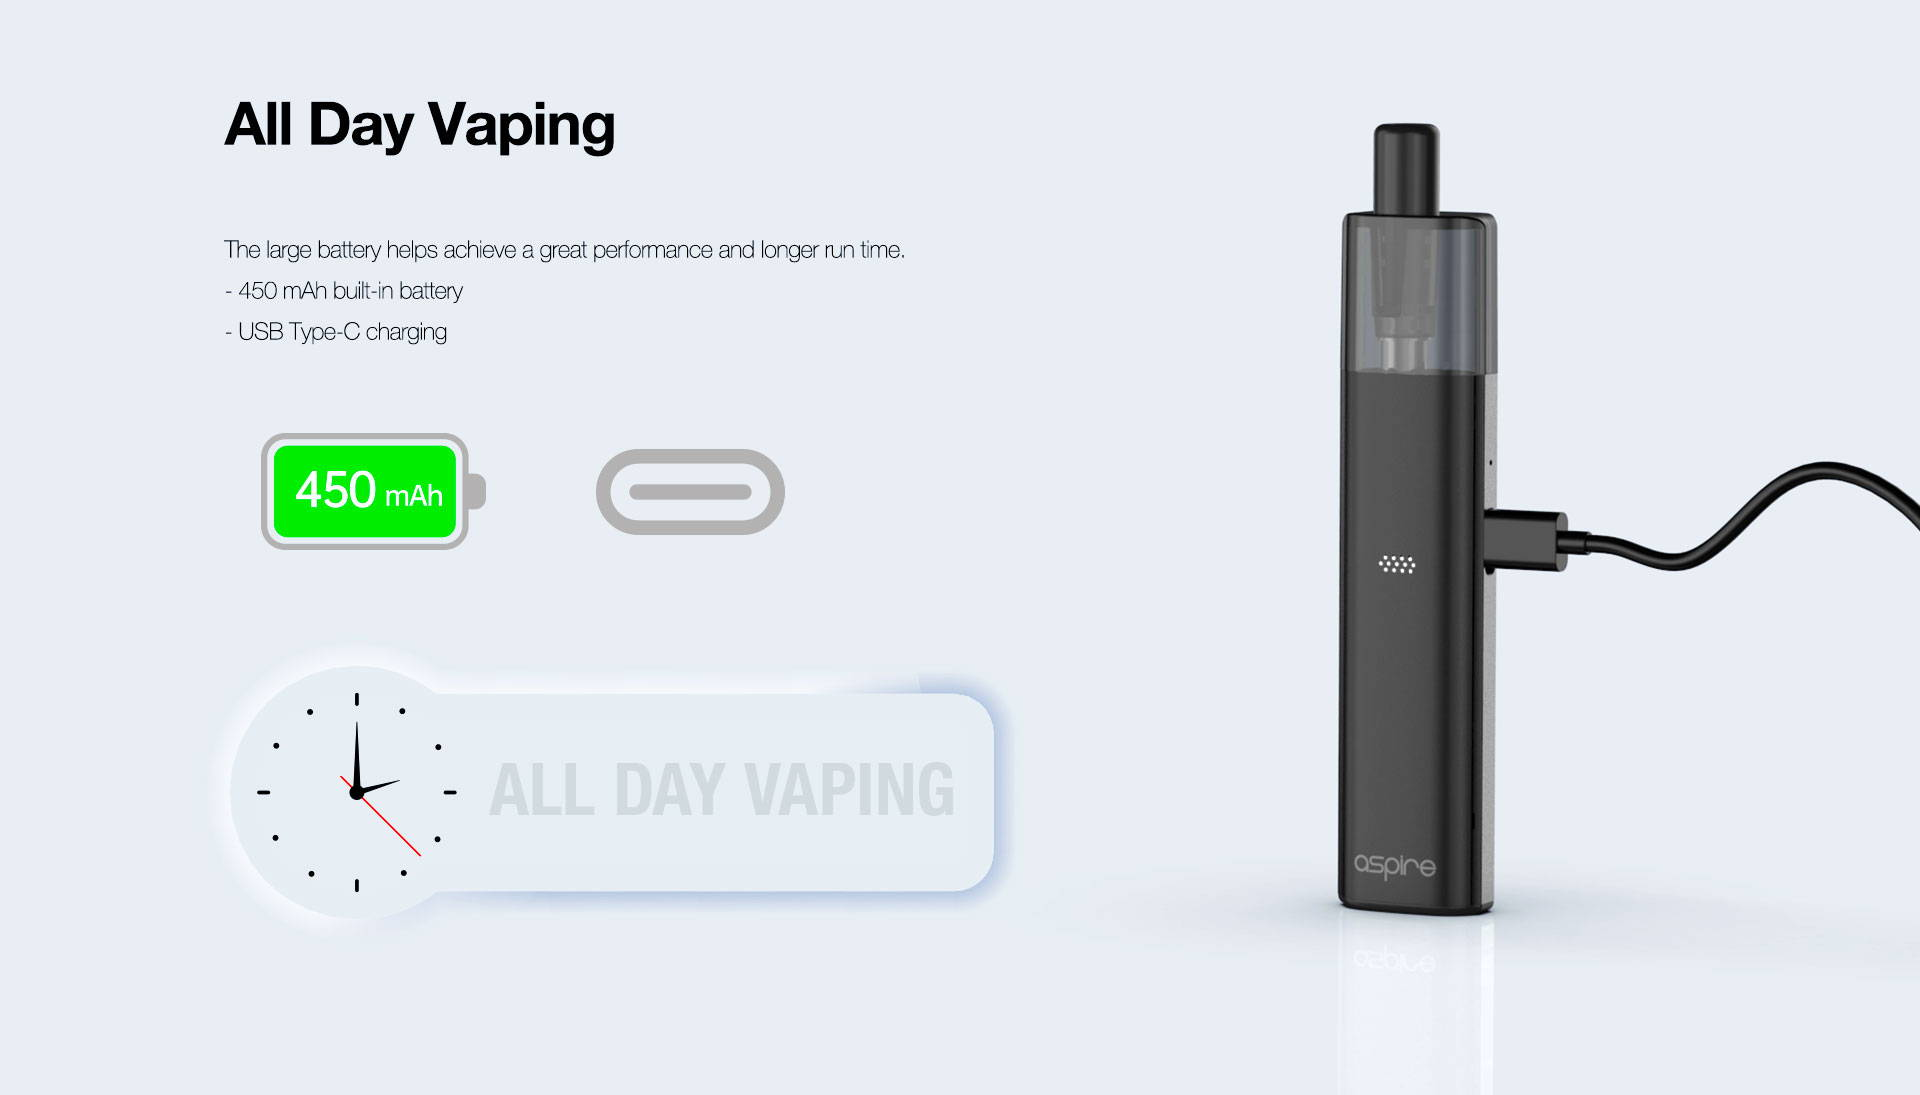 All Day Vaping   The large battery to help achieve a great performance and longer run time. 450 mAh built-in battery USB Type-C charging